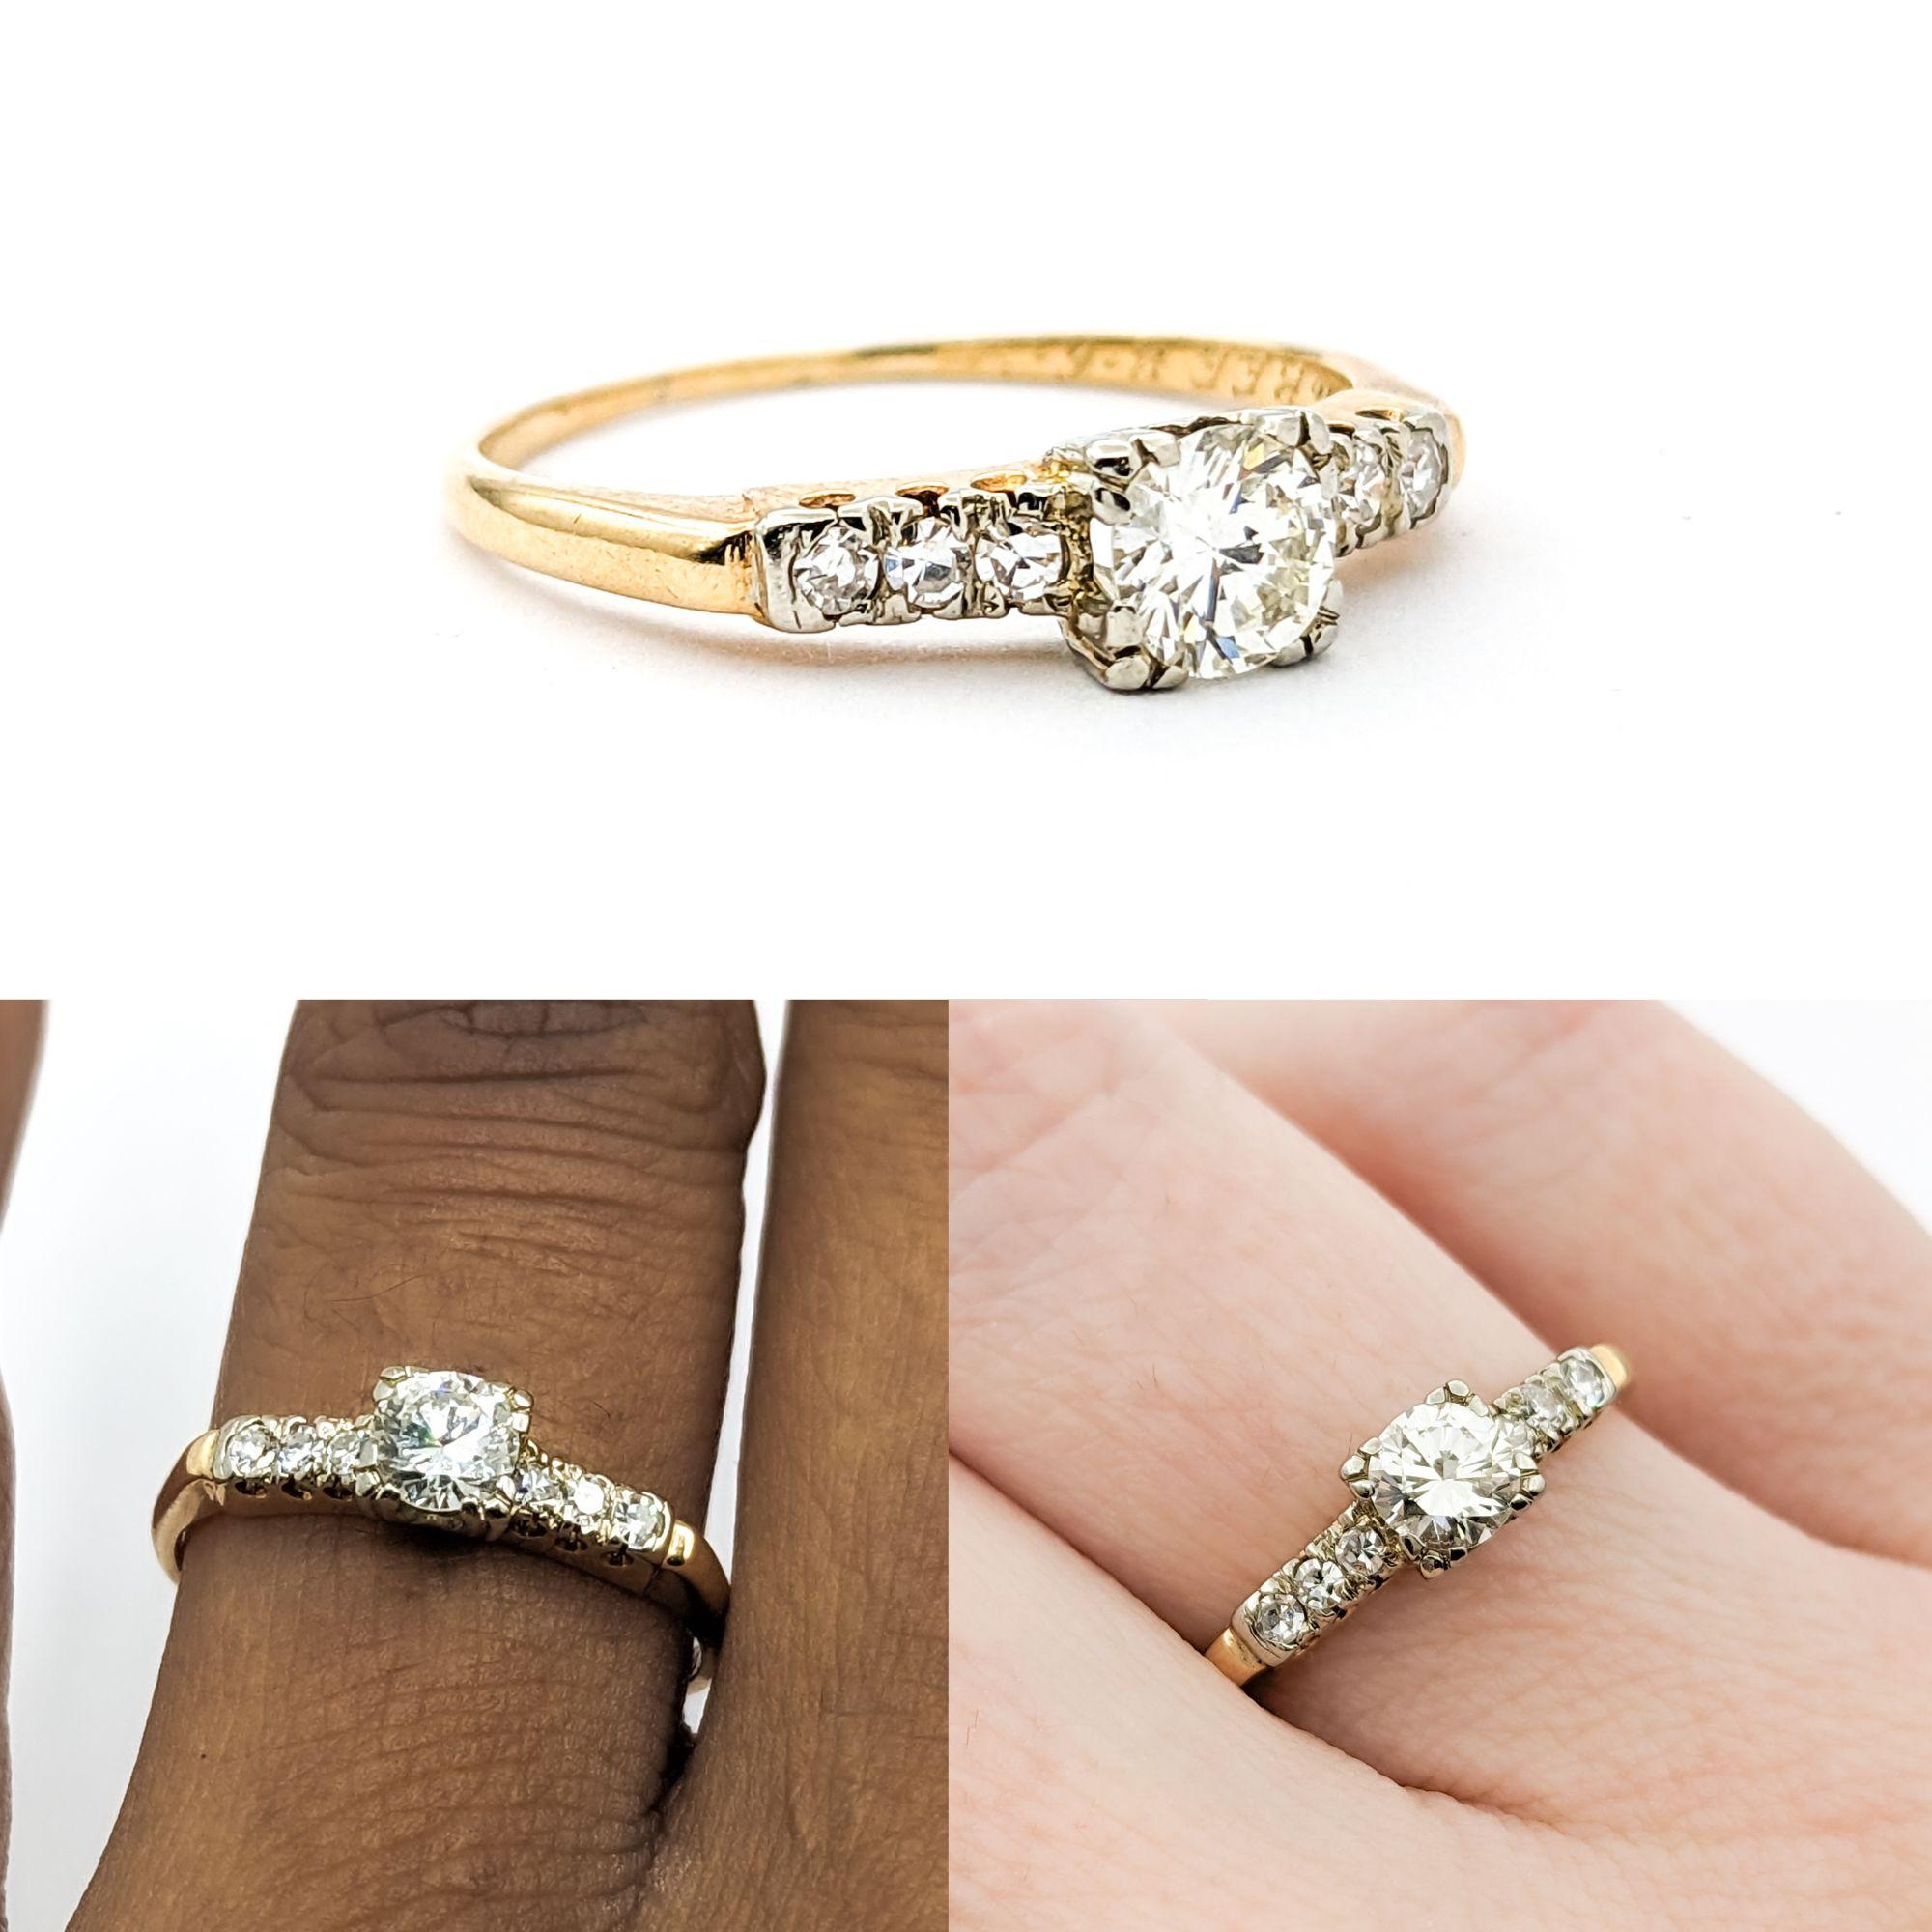 Vintage Diamonds Ring In Yellow Gold

This exquisite Vintage Ring is masterfully crafted in 14kt Yellow Gold and showcases a .33ct round diamond with sparkling SI1 clarity and H-I color. Complemented by an additional .15ctw of diamonds, this ring